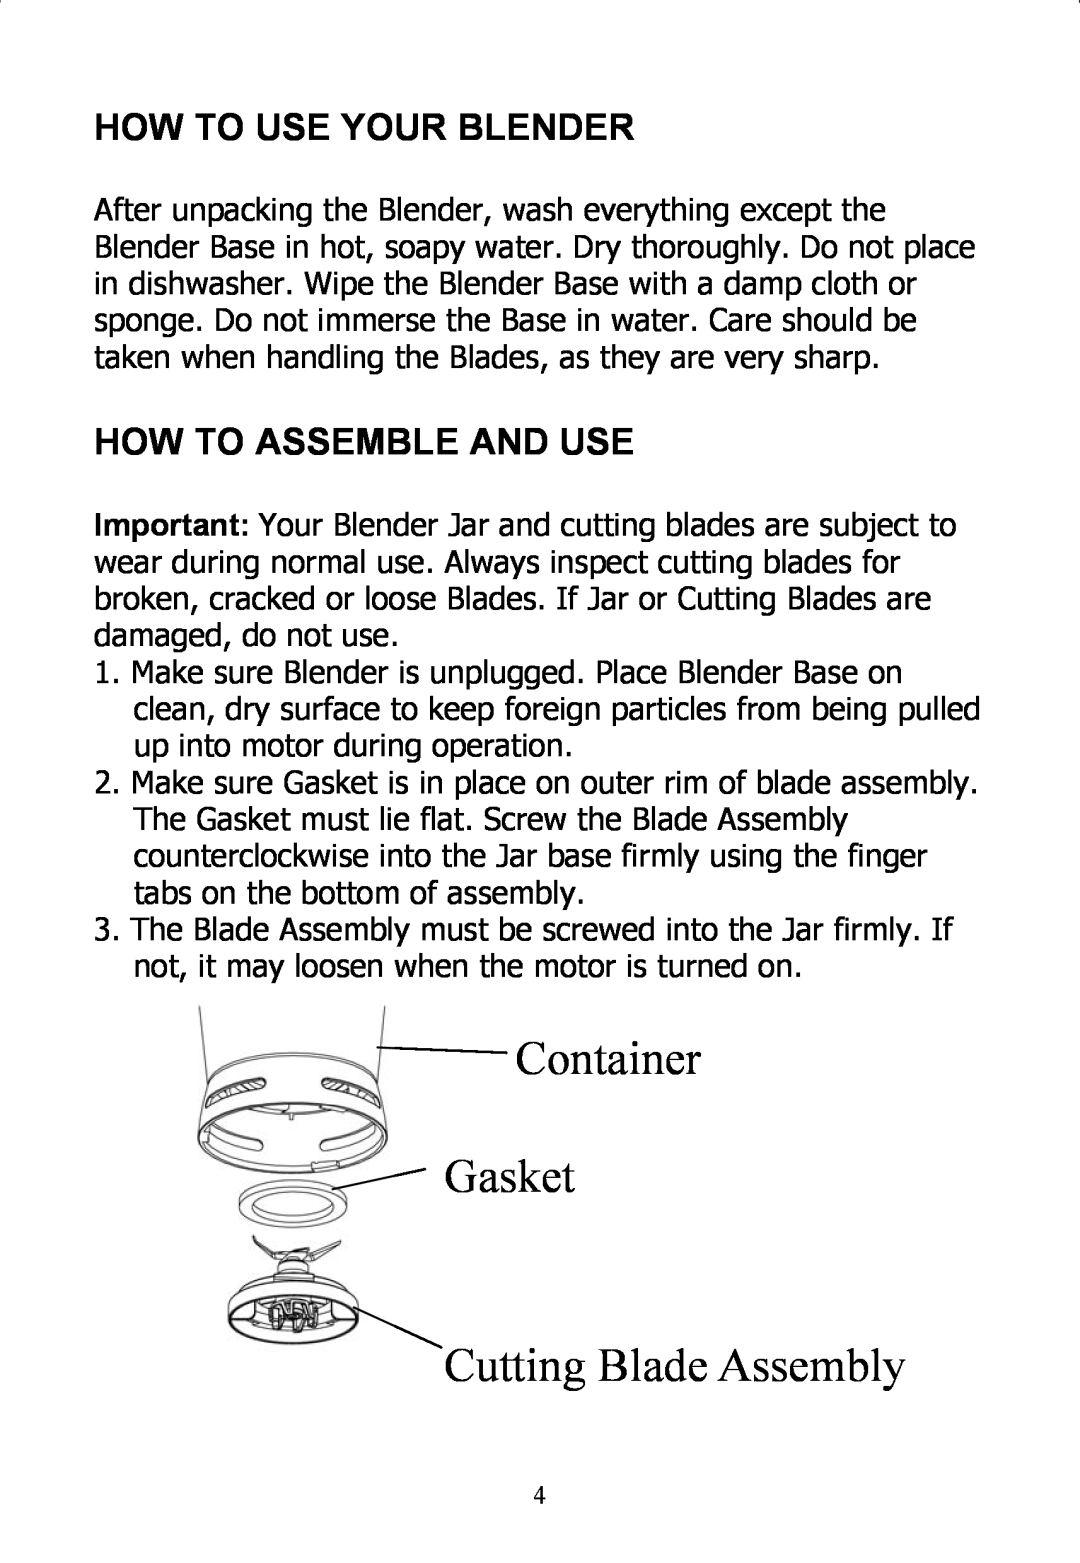 Rival DC-TB170 instruction manual How To Use Your Blender, How To Assemble And Use, Container Gasket Cutting Blade Assembly 